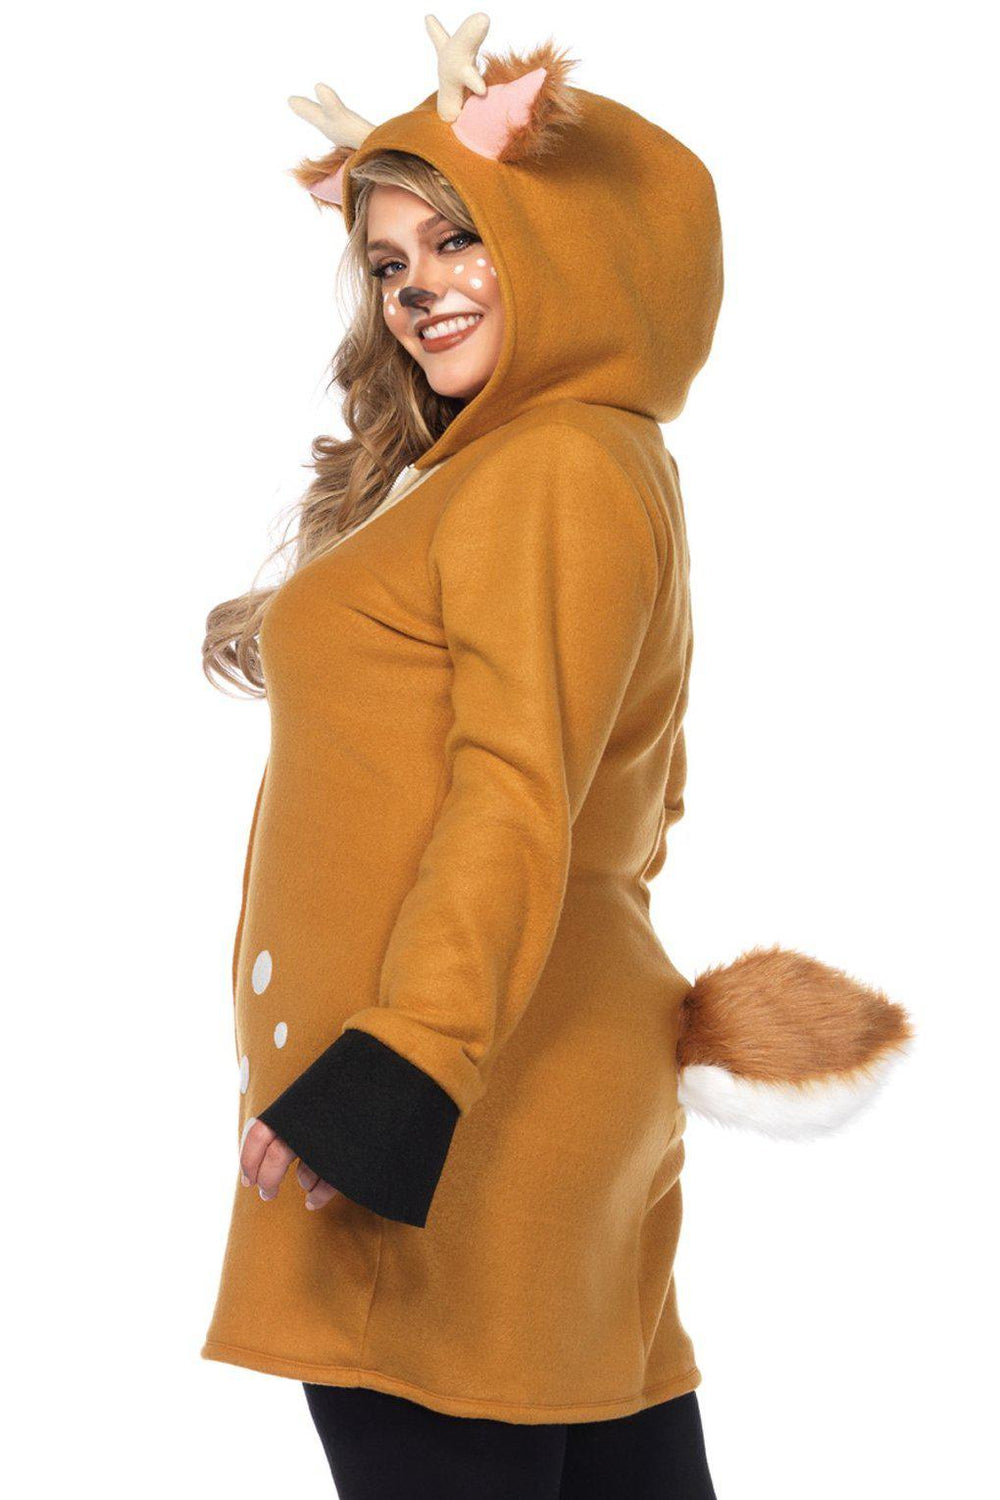 Plus Size Sexy Fawn Costume Dress-Animal Costumes-Leg Avenue-SEXYSHOES.COM